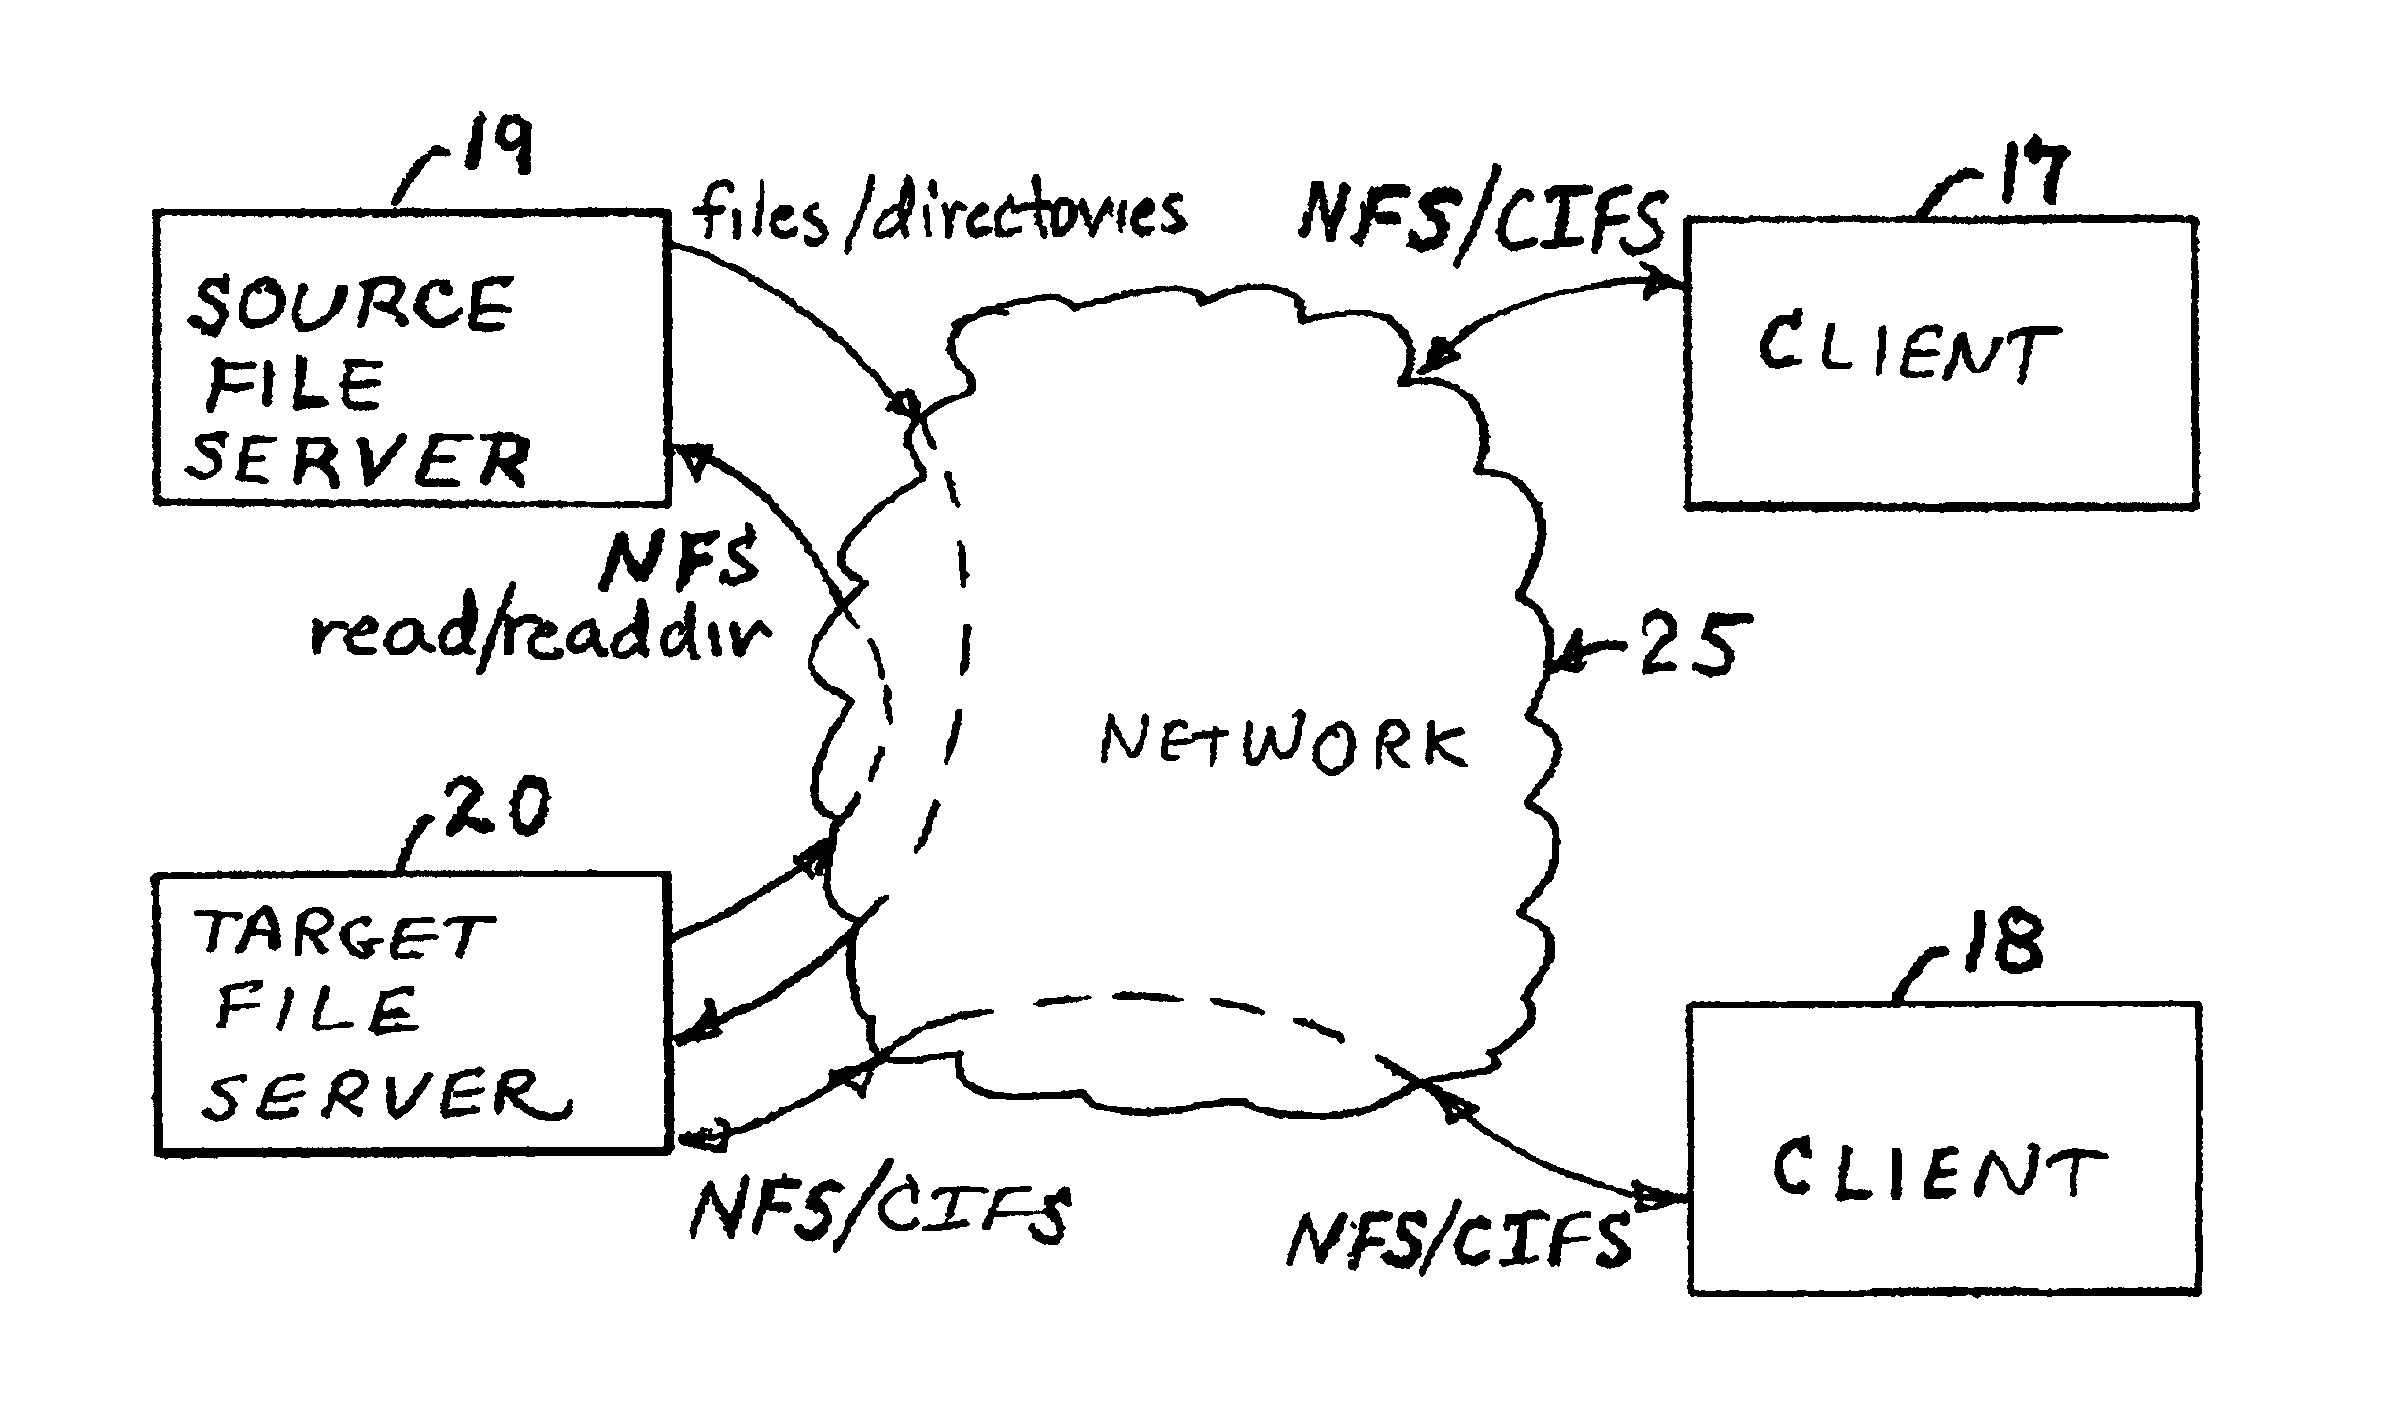 Concurrent file across at a target file server during migration of file systems between file servers using a network file system access protocol